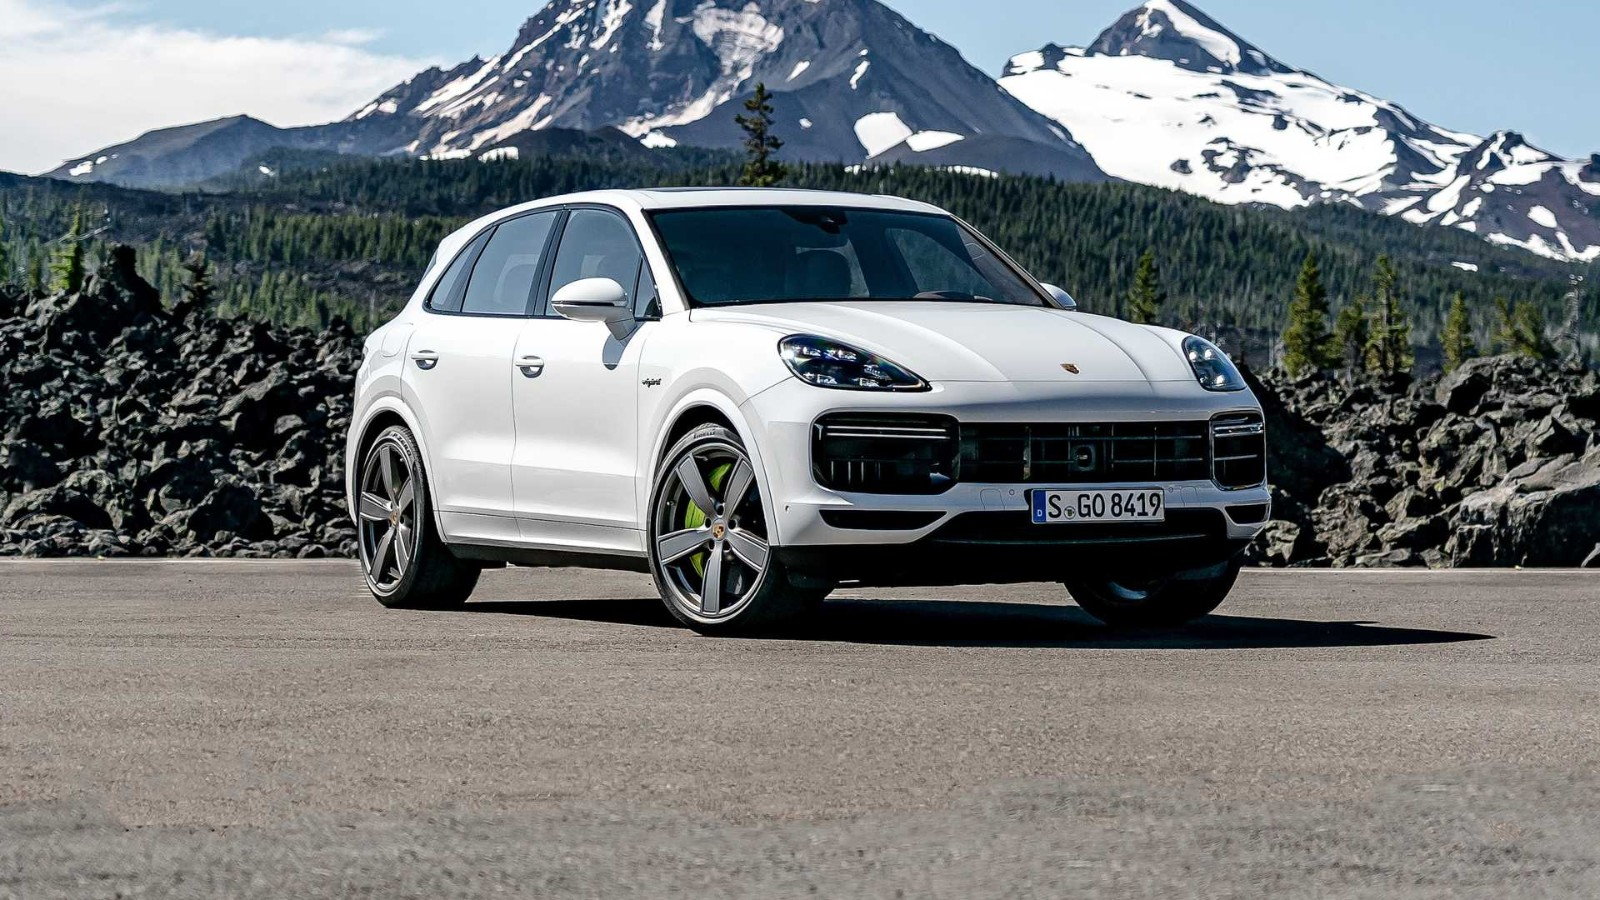 Porsche Cayenne Turbo S EHybrid is the Future of